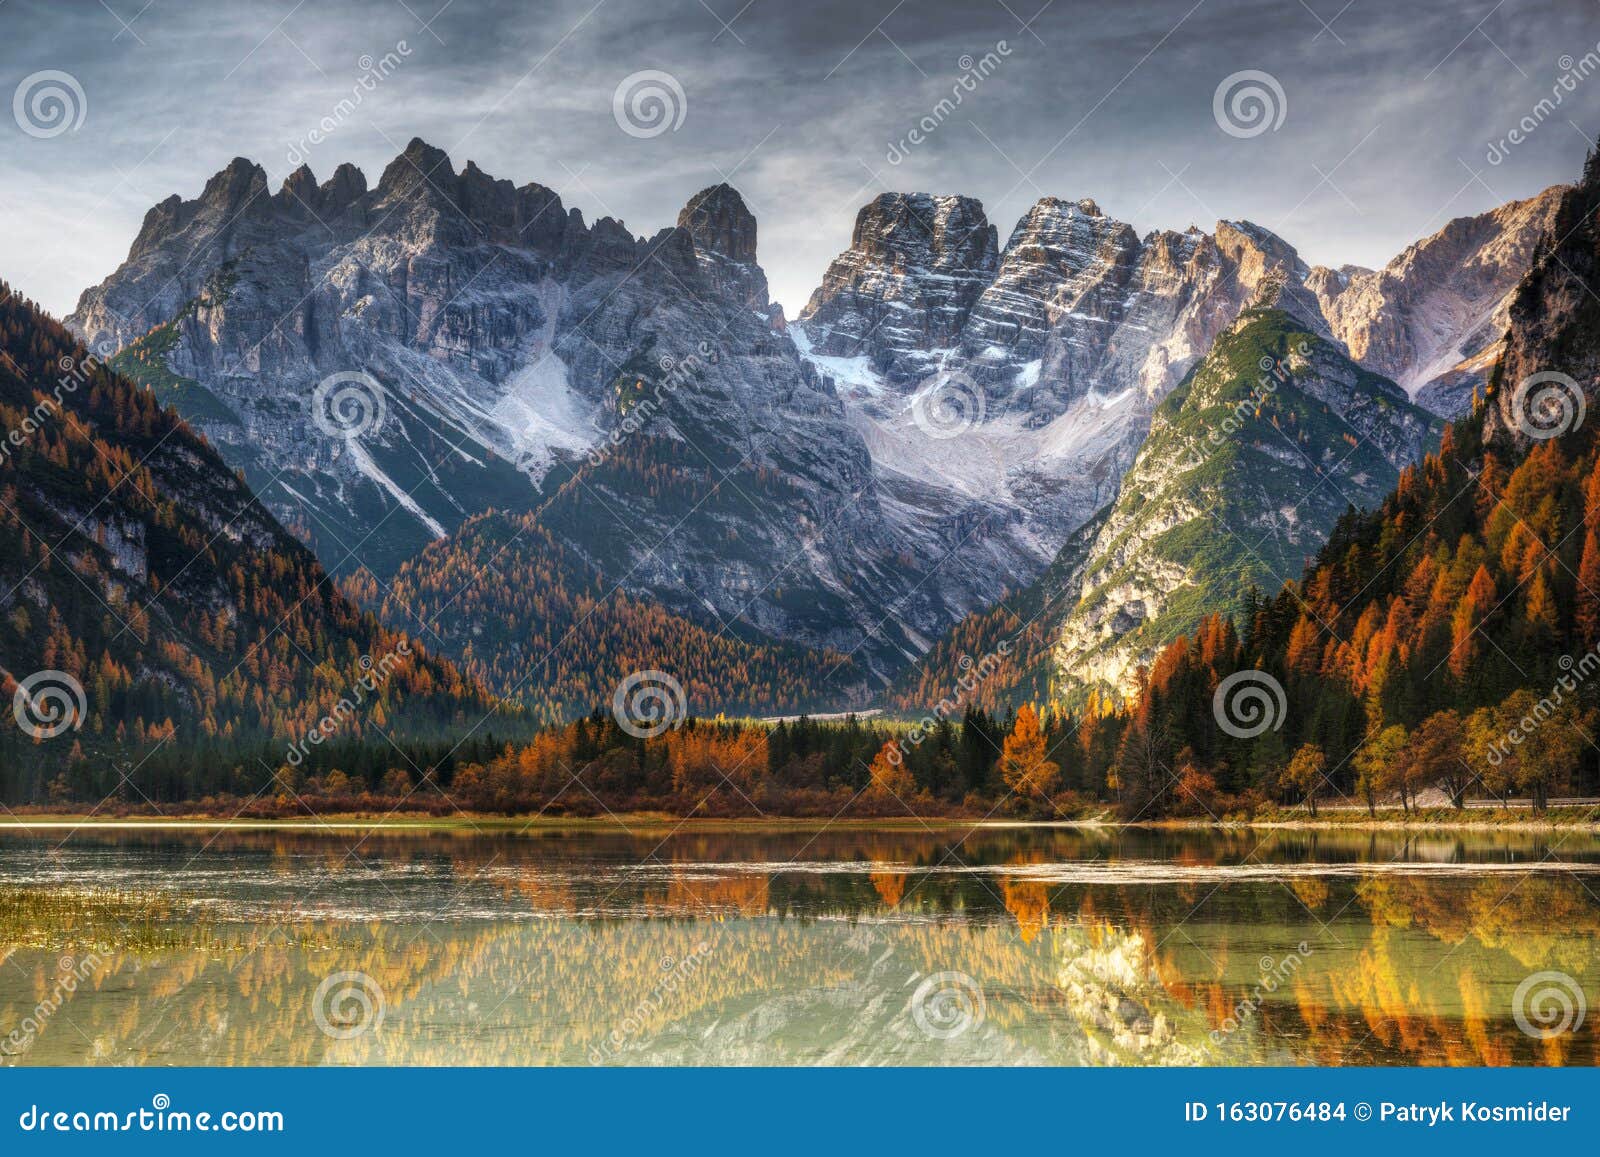 monte cristallo mountains in the autumnal scenery of the dolomites, south tyrol. italy